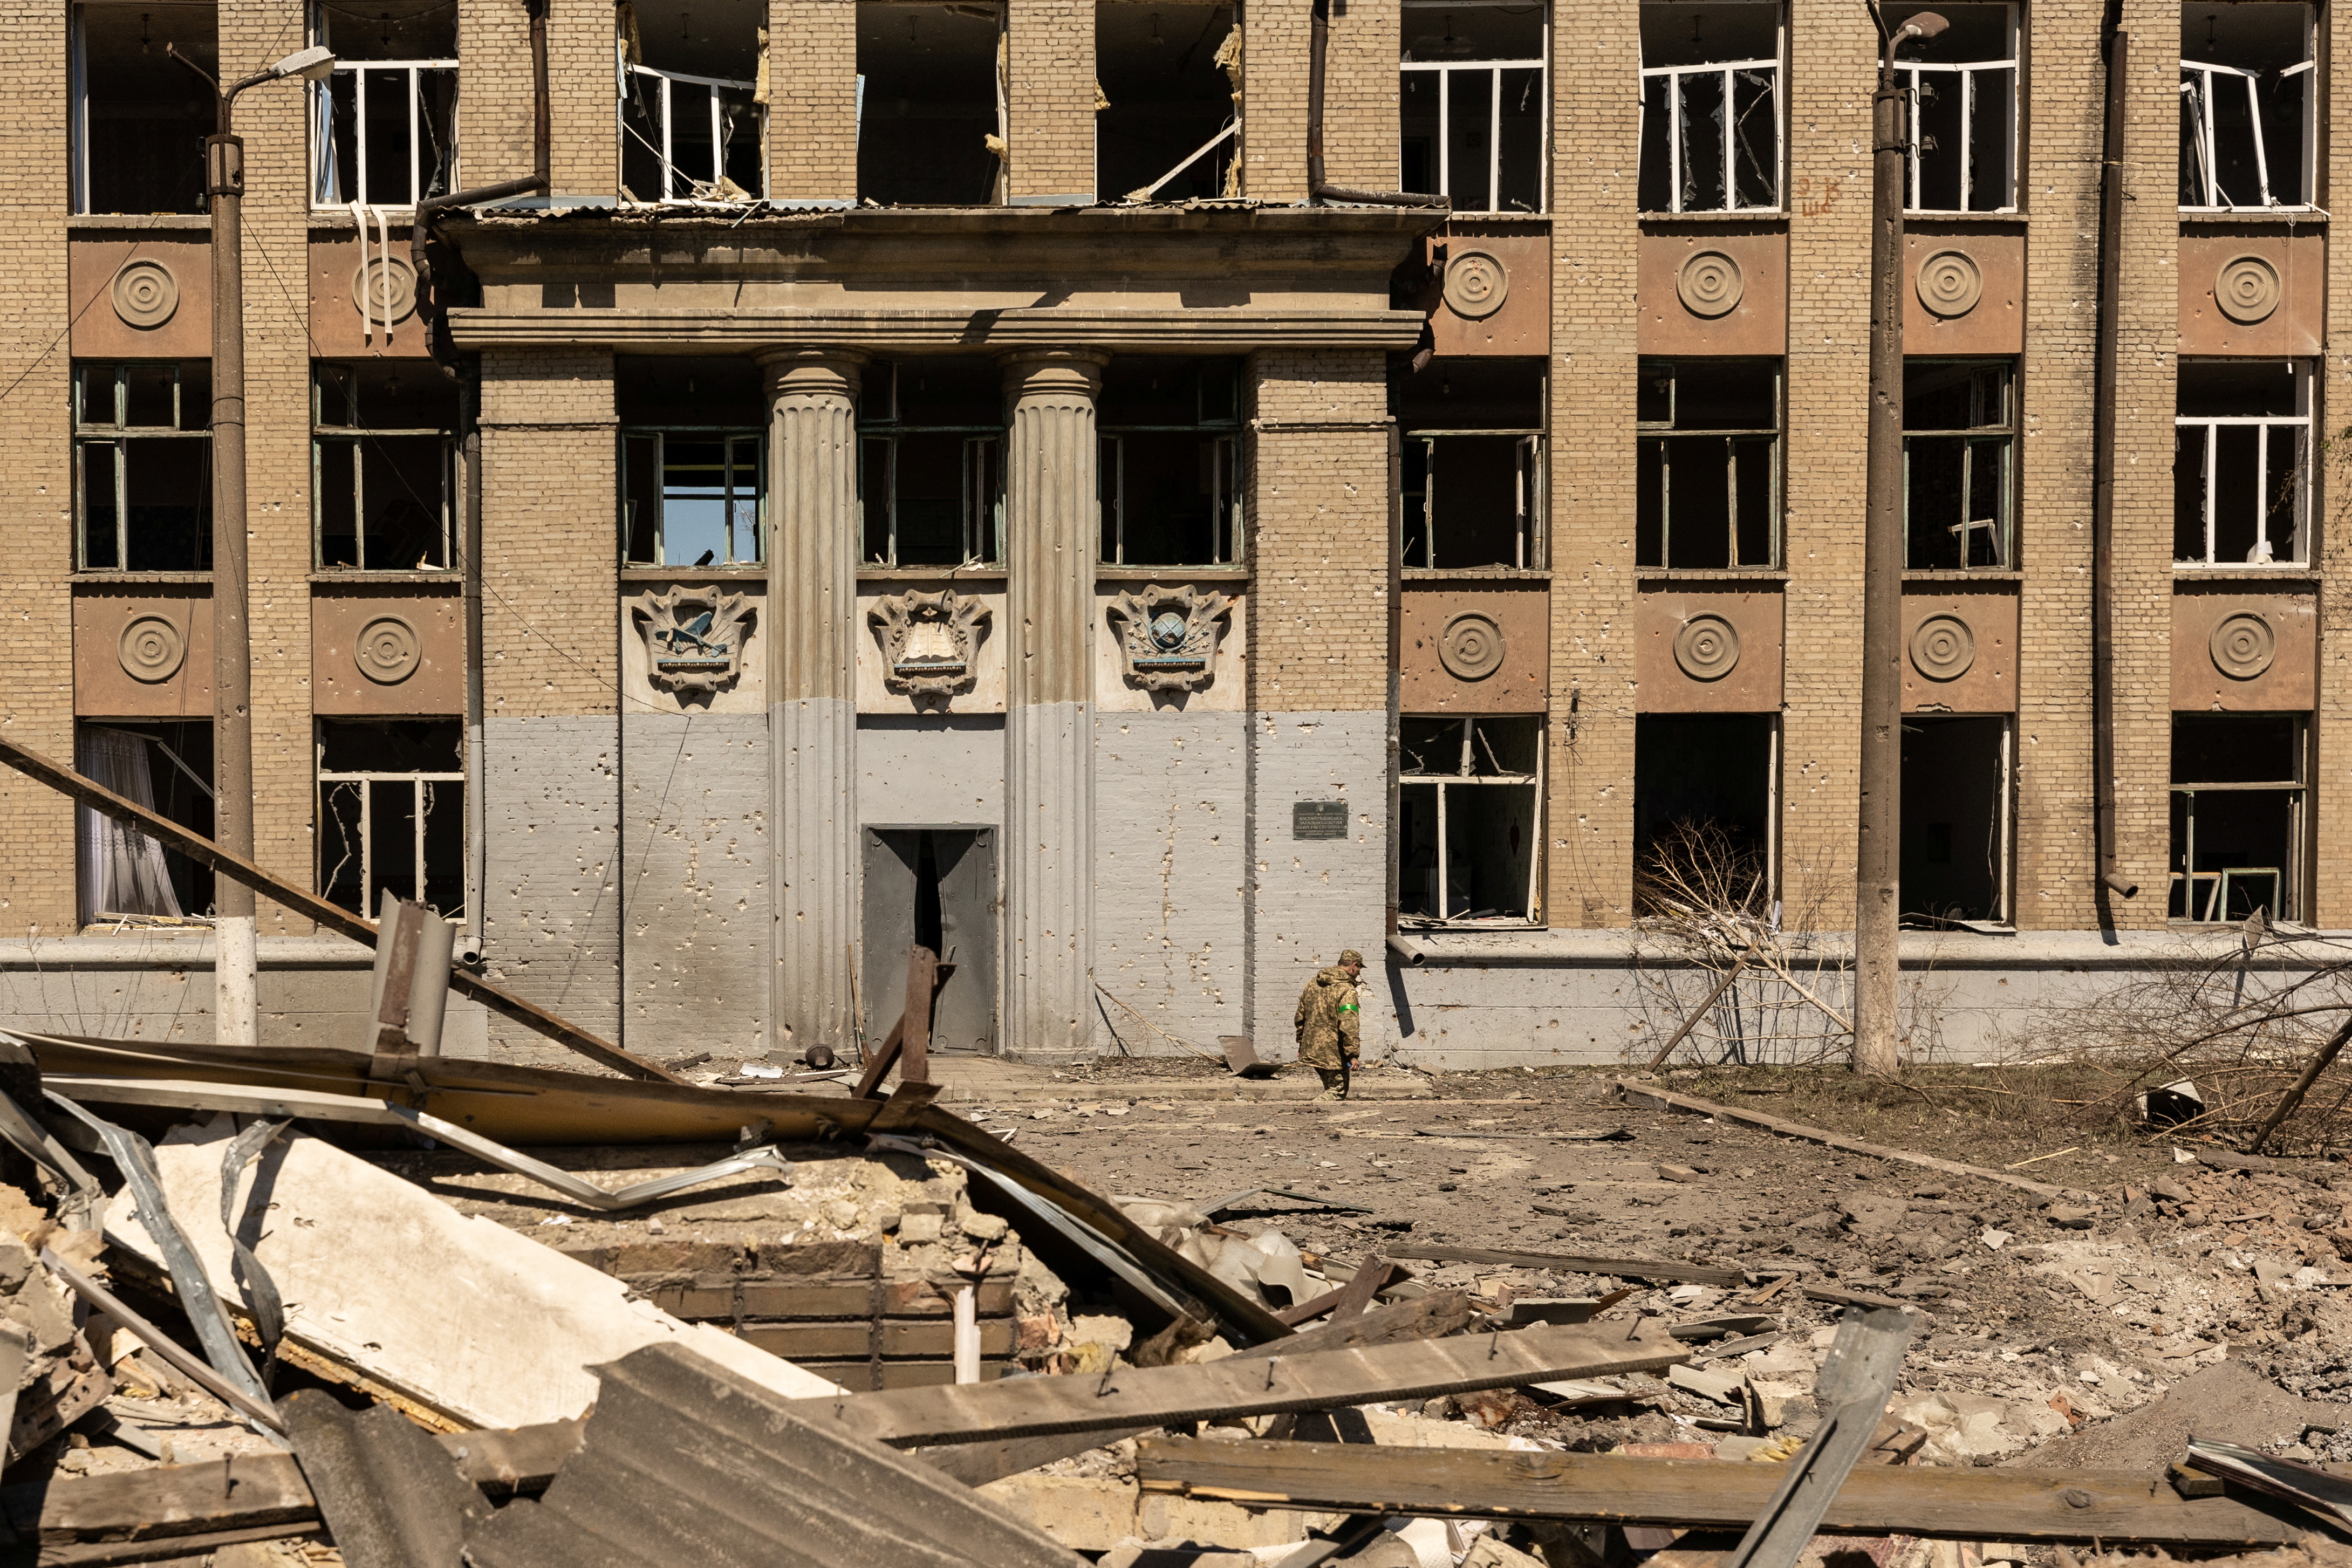 A Ukrainian soldier walks in front of a school that was bombed amid Russia's invasion in Ukraine, in Kostyantynivka, in the Donetsk region